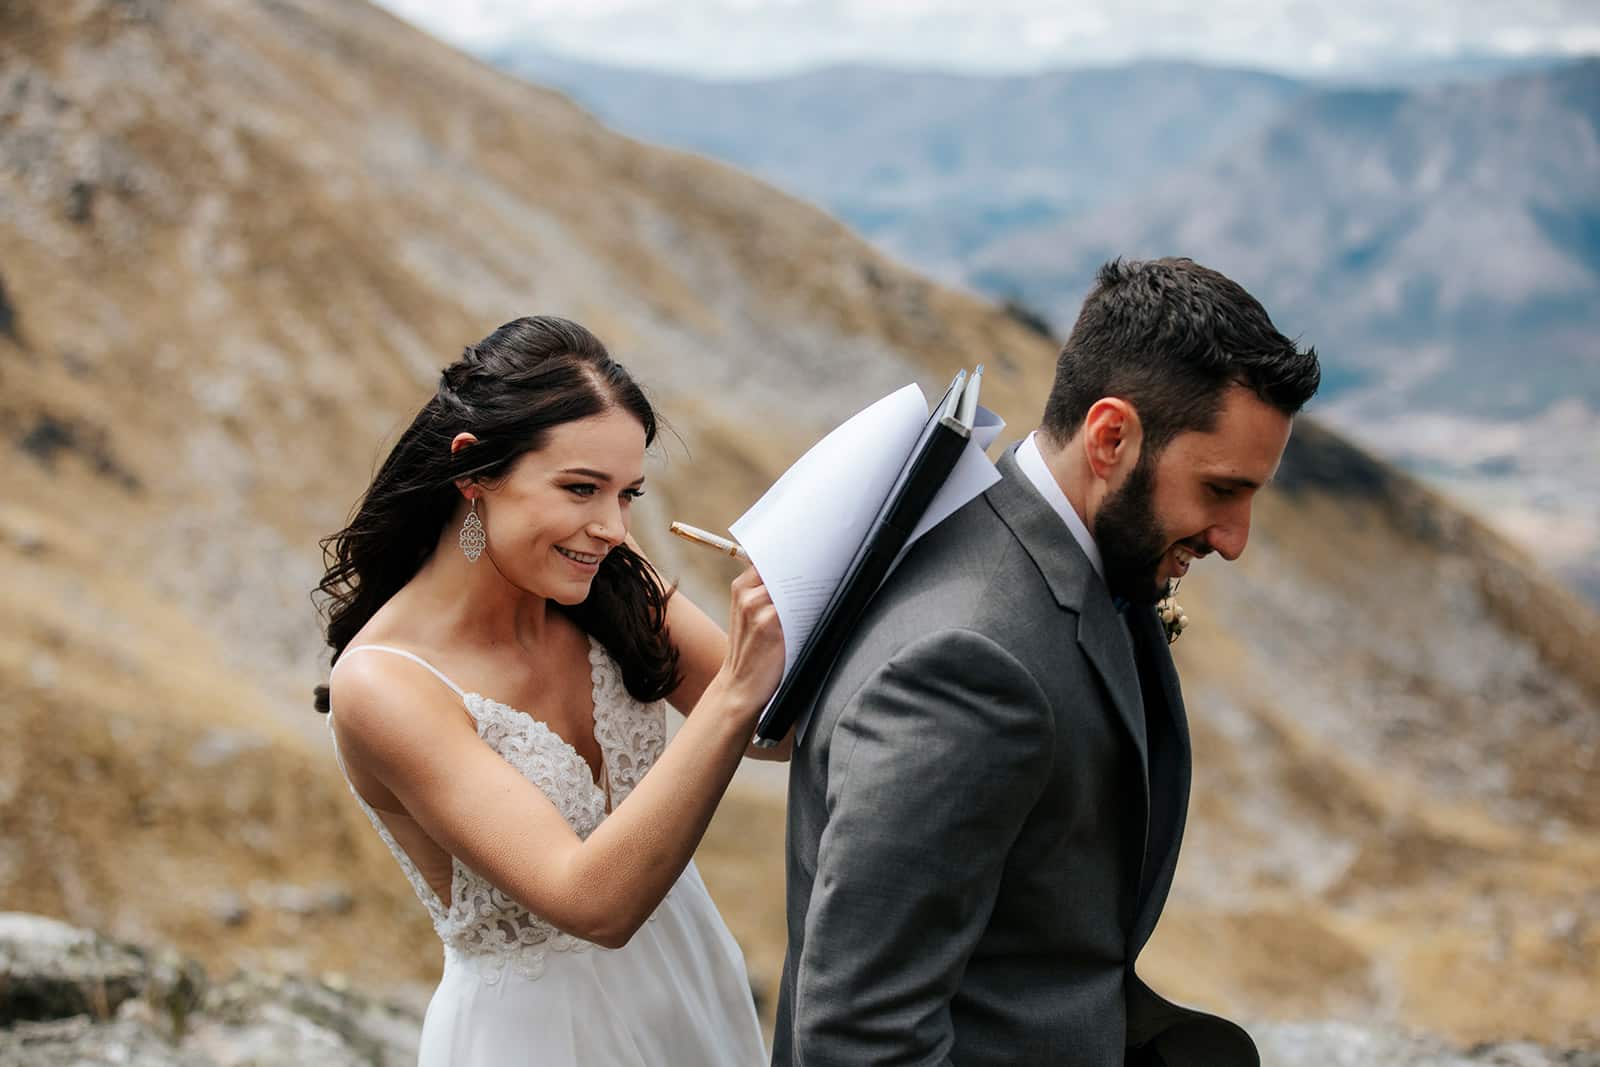 Family Heli Wedding with Helicopter in Queenstown with black wedding dress